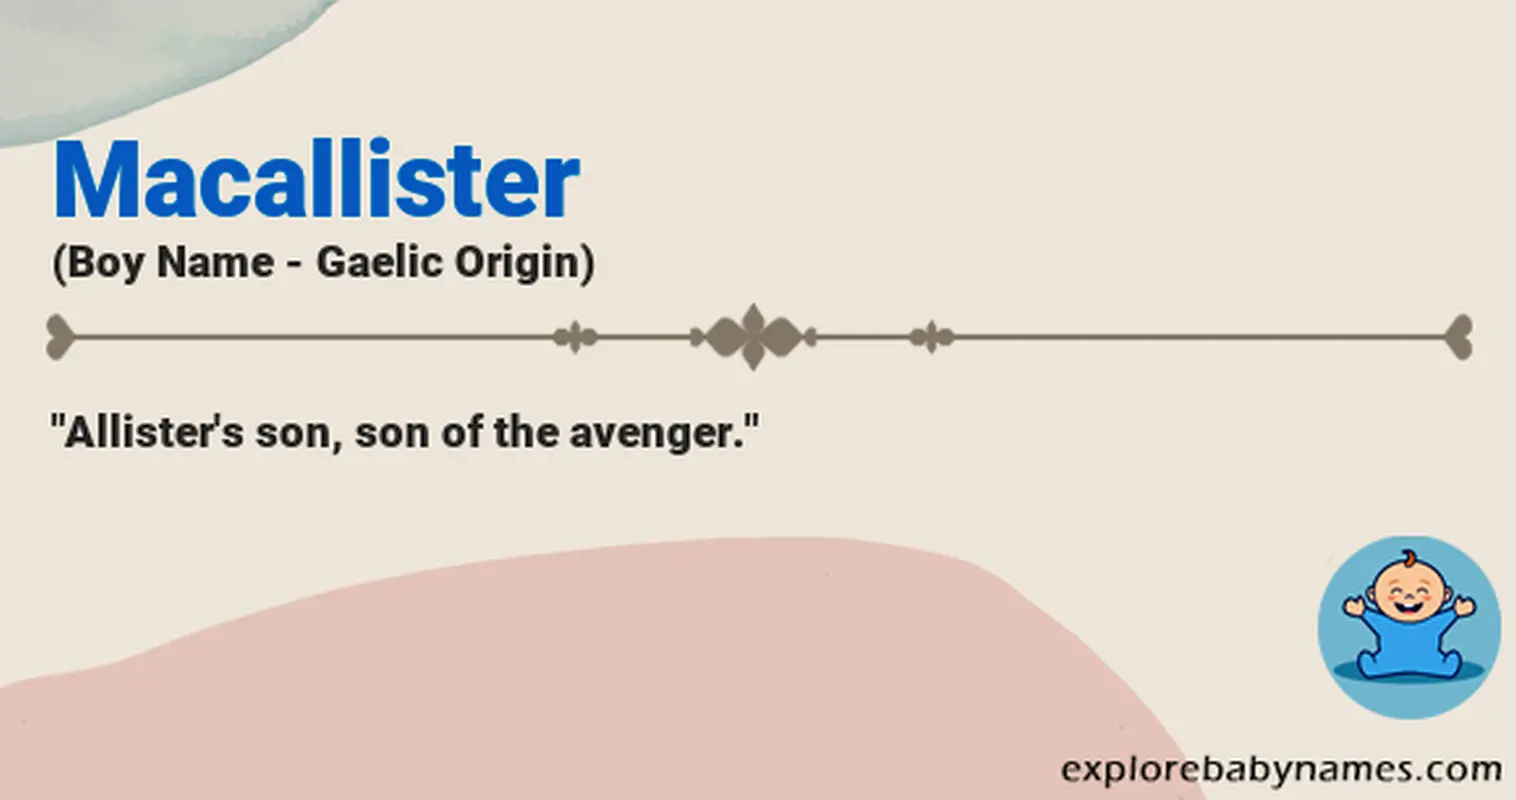 Meaning of Macallister